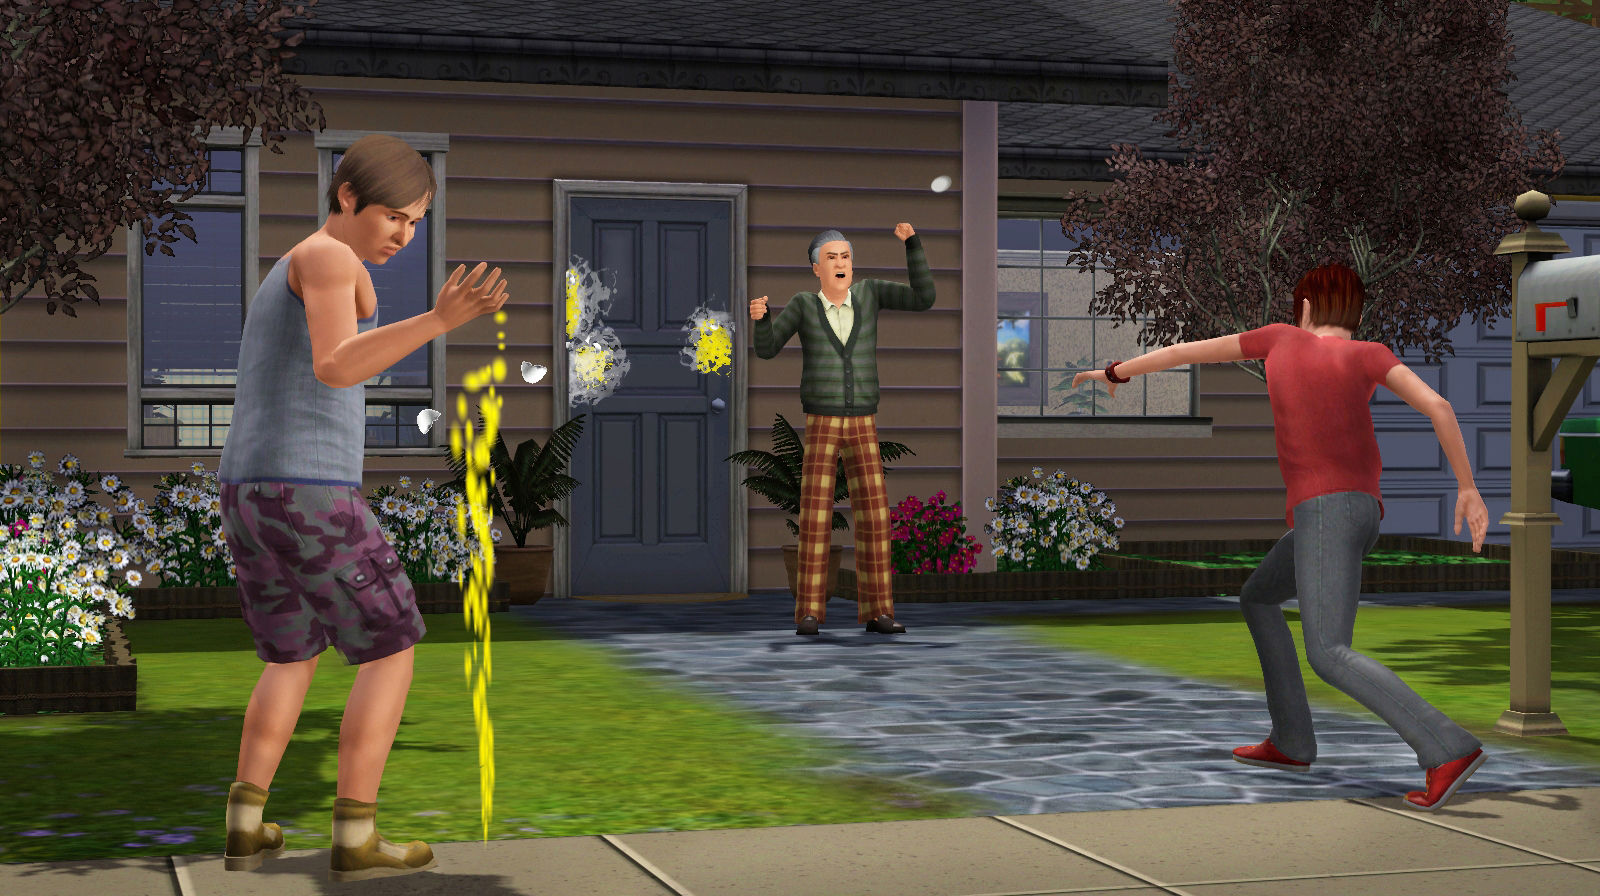 Sims 3 New Patch 2014